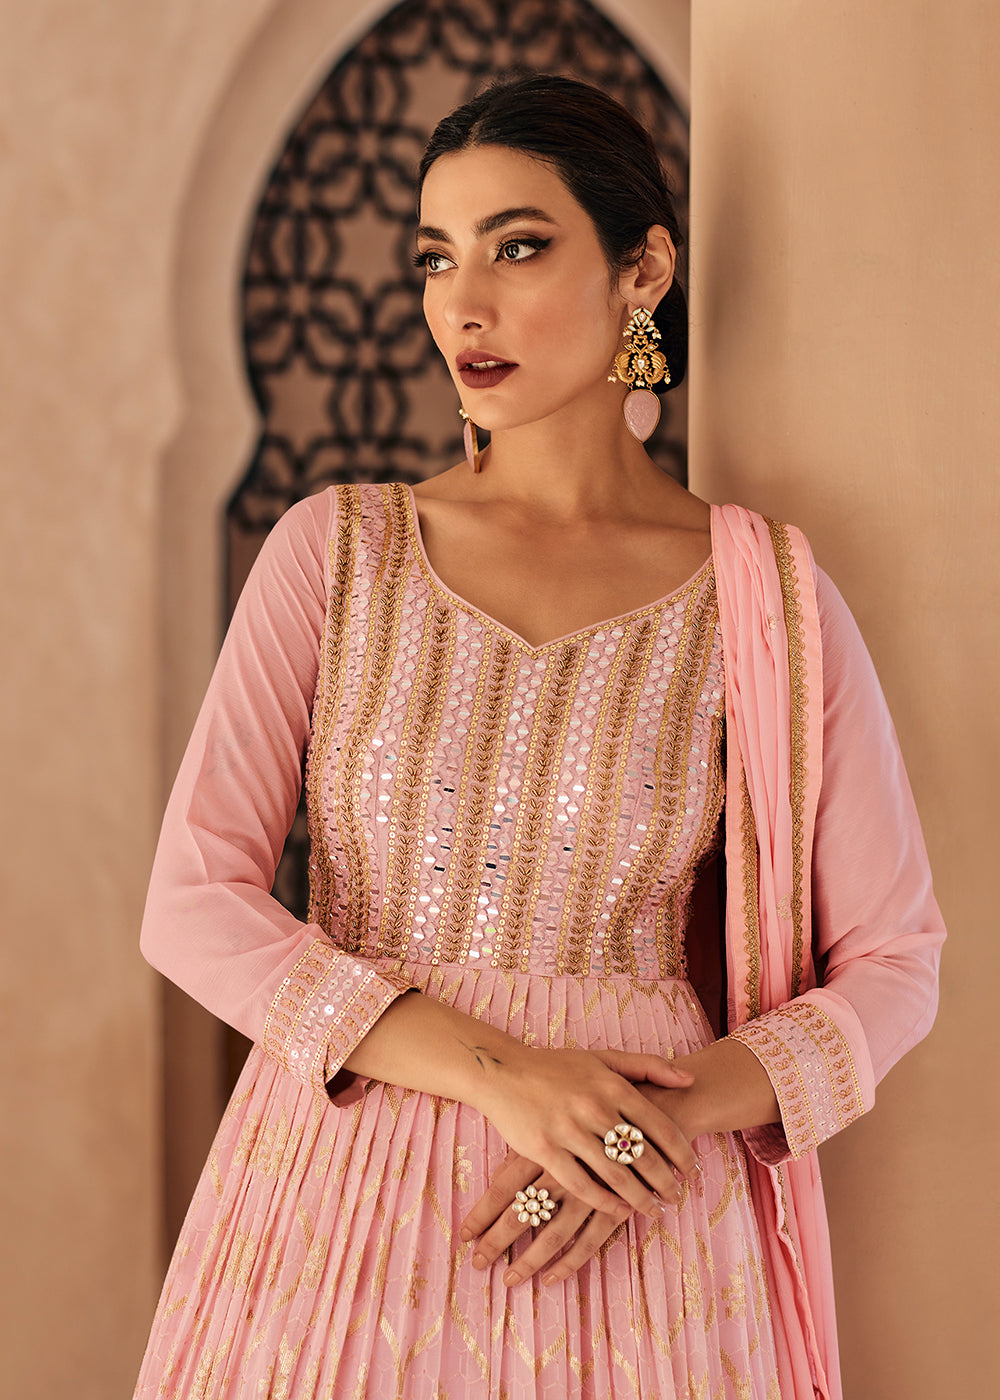 Buy Now Lovely Light Pink Georgette Traditional Wedding Anarkali Suit Online in USA, UK, Australia, New Zealand, Canada & Worldwide at Empress Clothing.